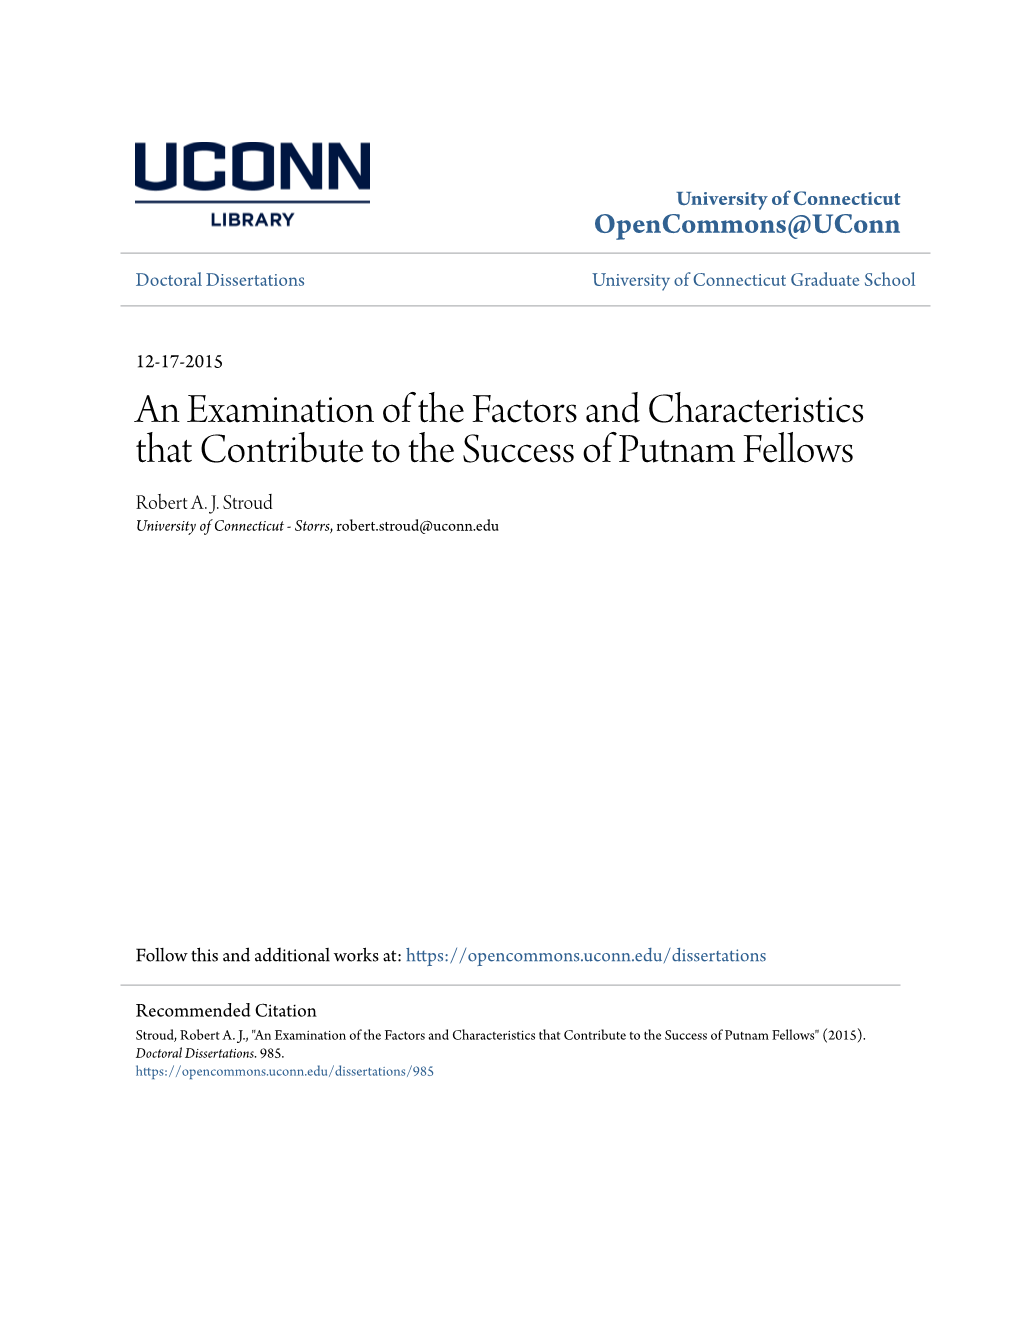 An Examination of the Factors and Characteristics That Contribute to the Success of Putnam Fellows Robert A